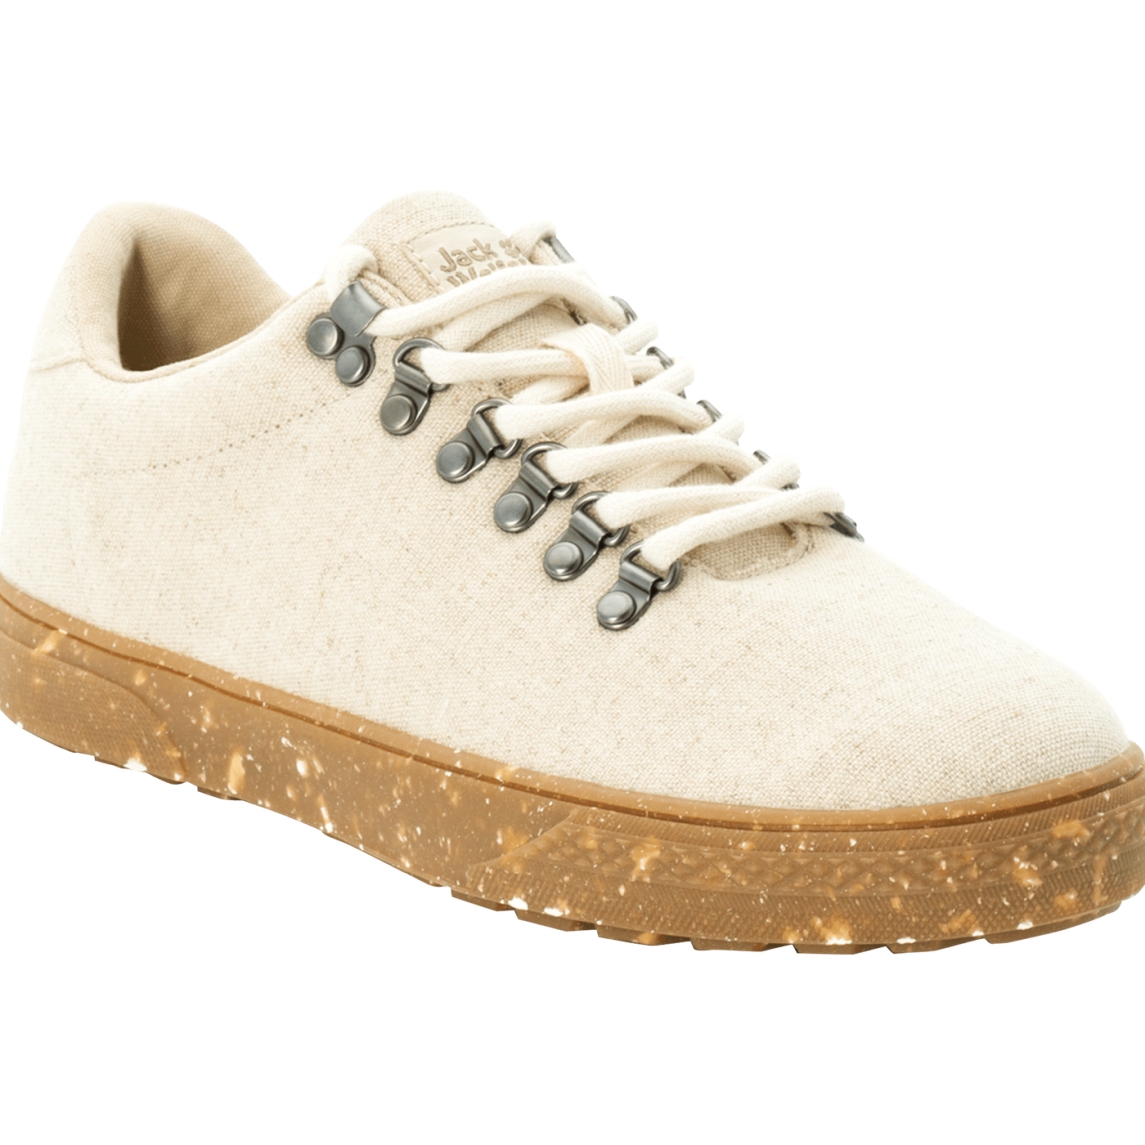 Picture of Jack Wolfskin Ecostride 3 Low Shoes Women - natural / cork